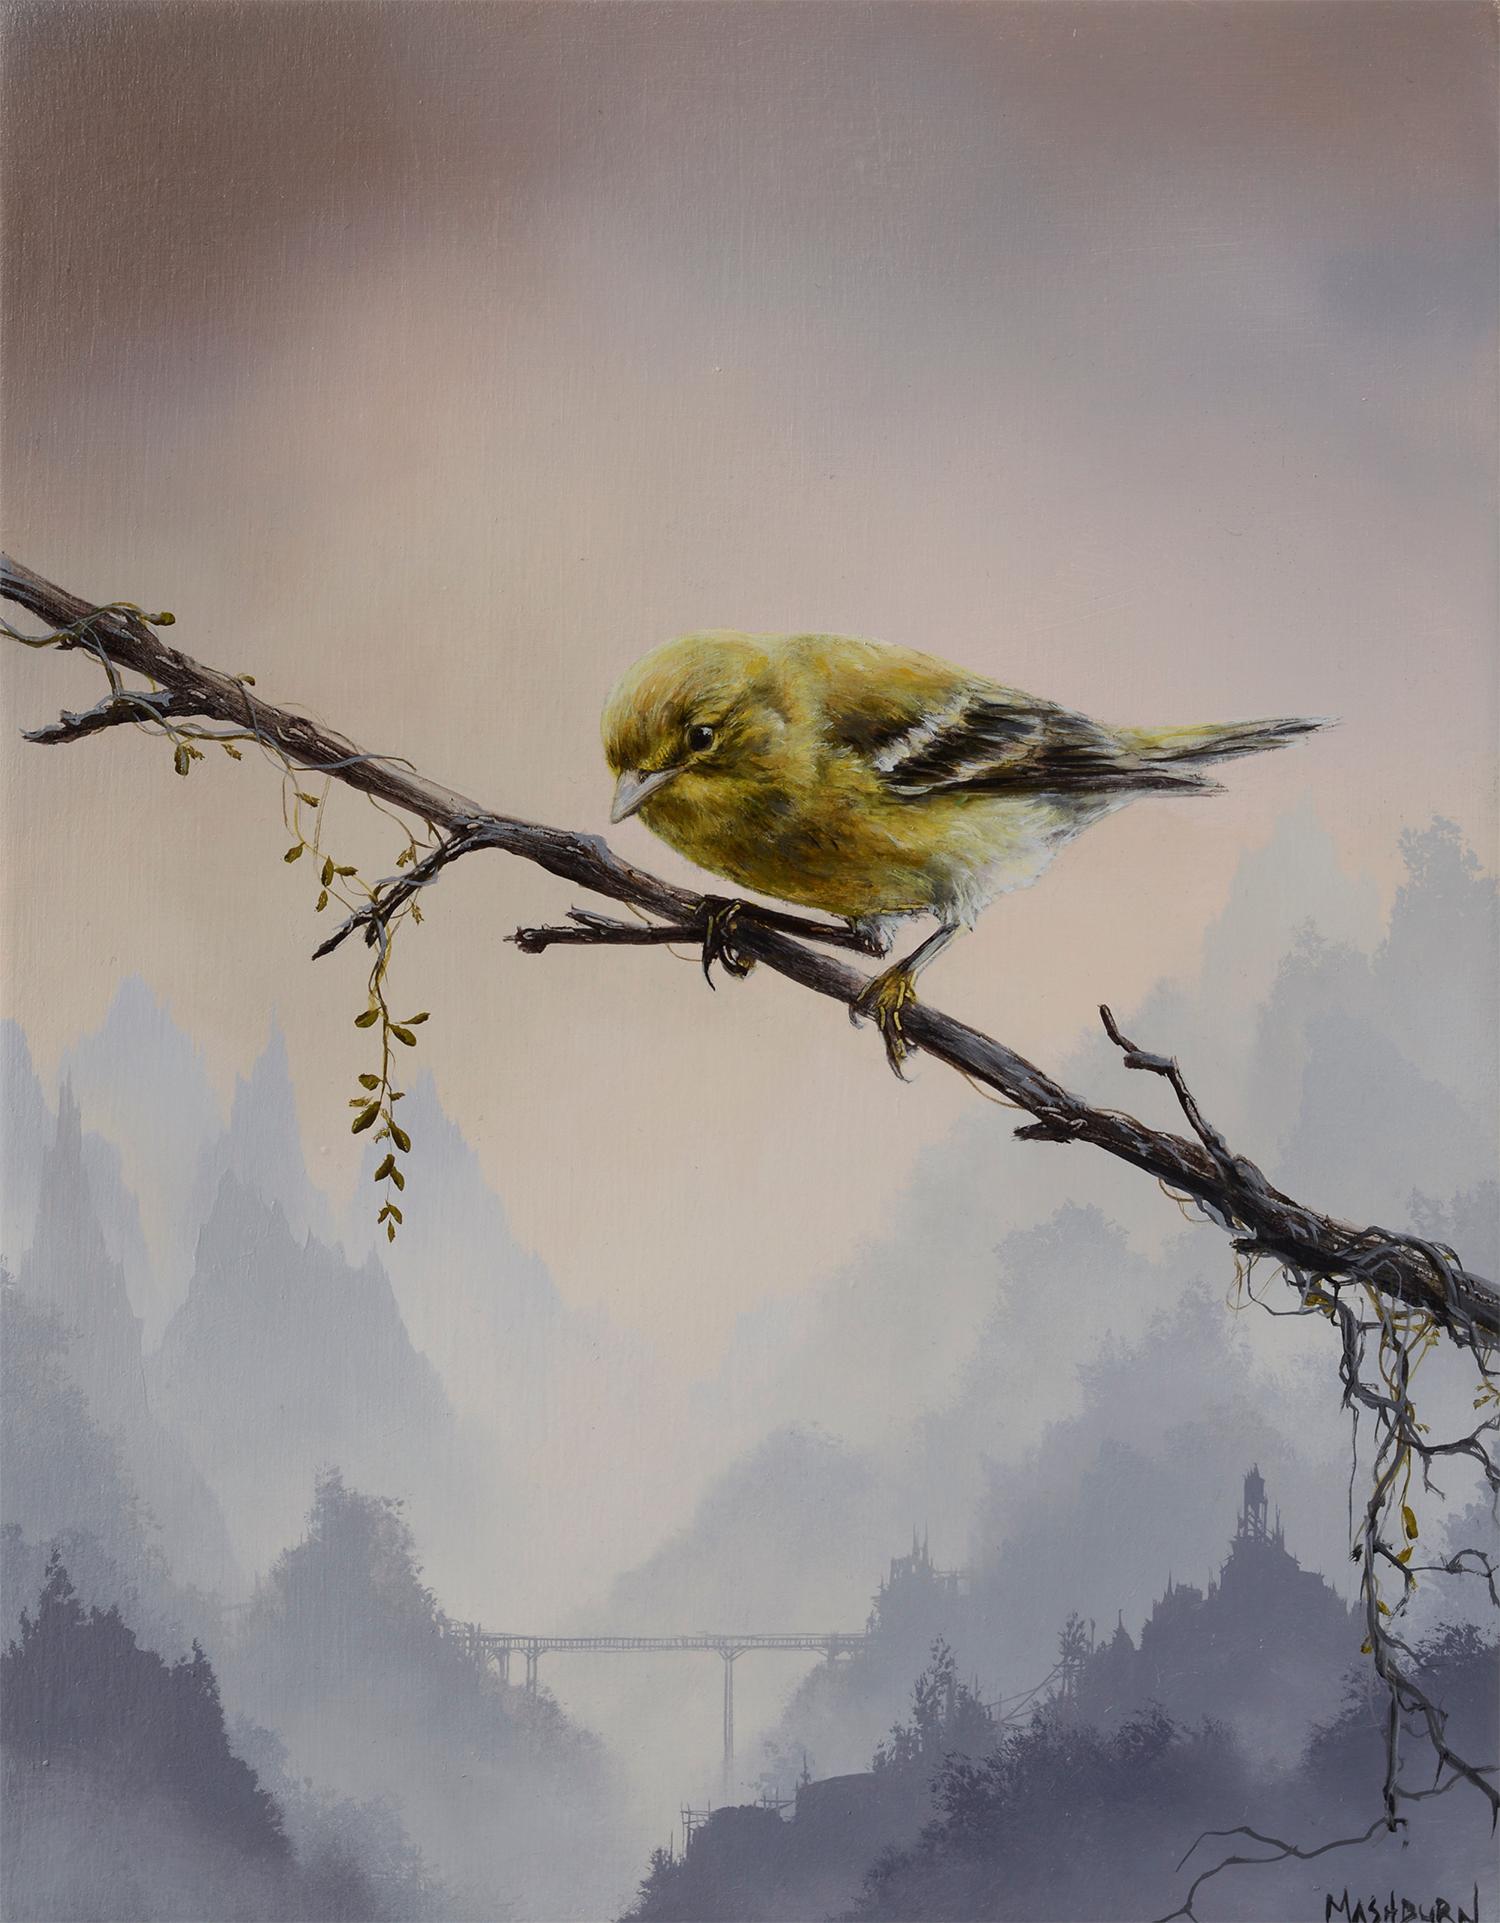 Brian Mashburn Landscape Painting - "Pine Warbler Perched On a Twig" Original oil painting